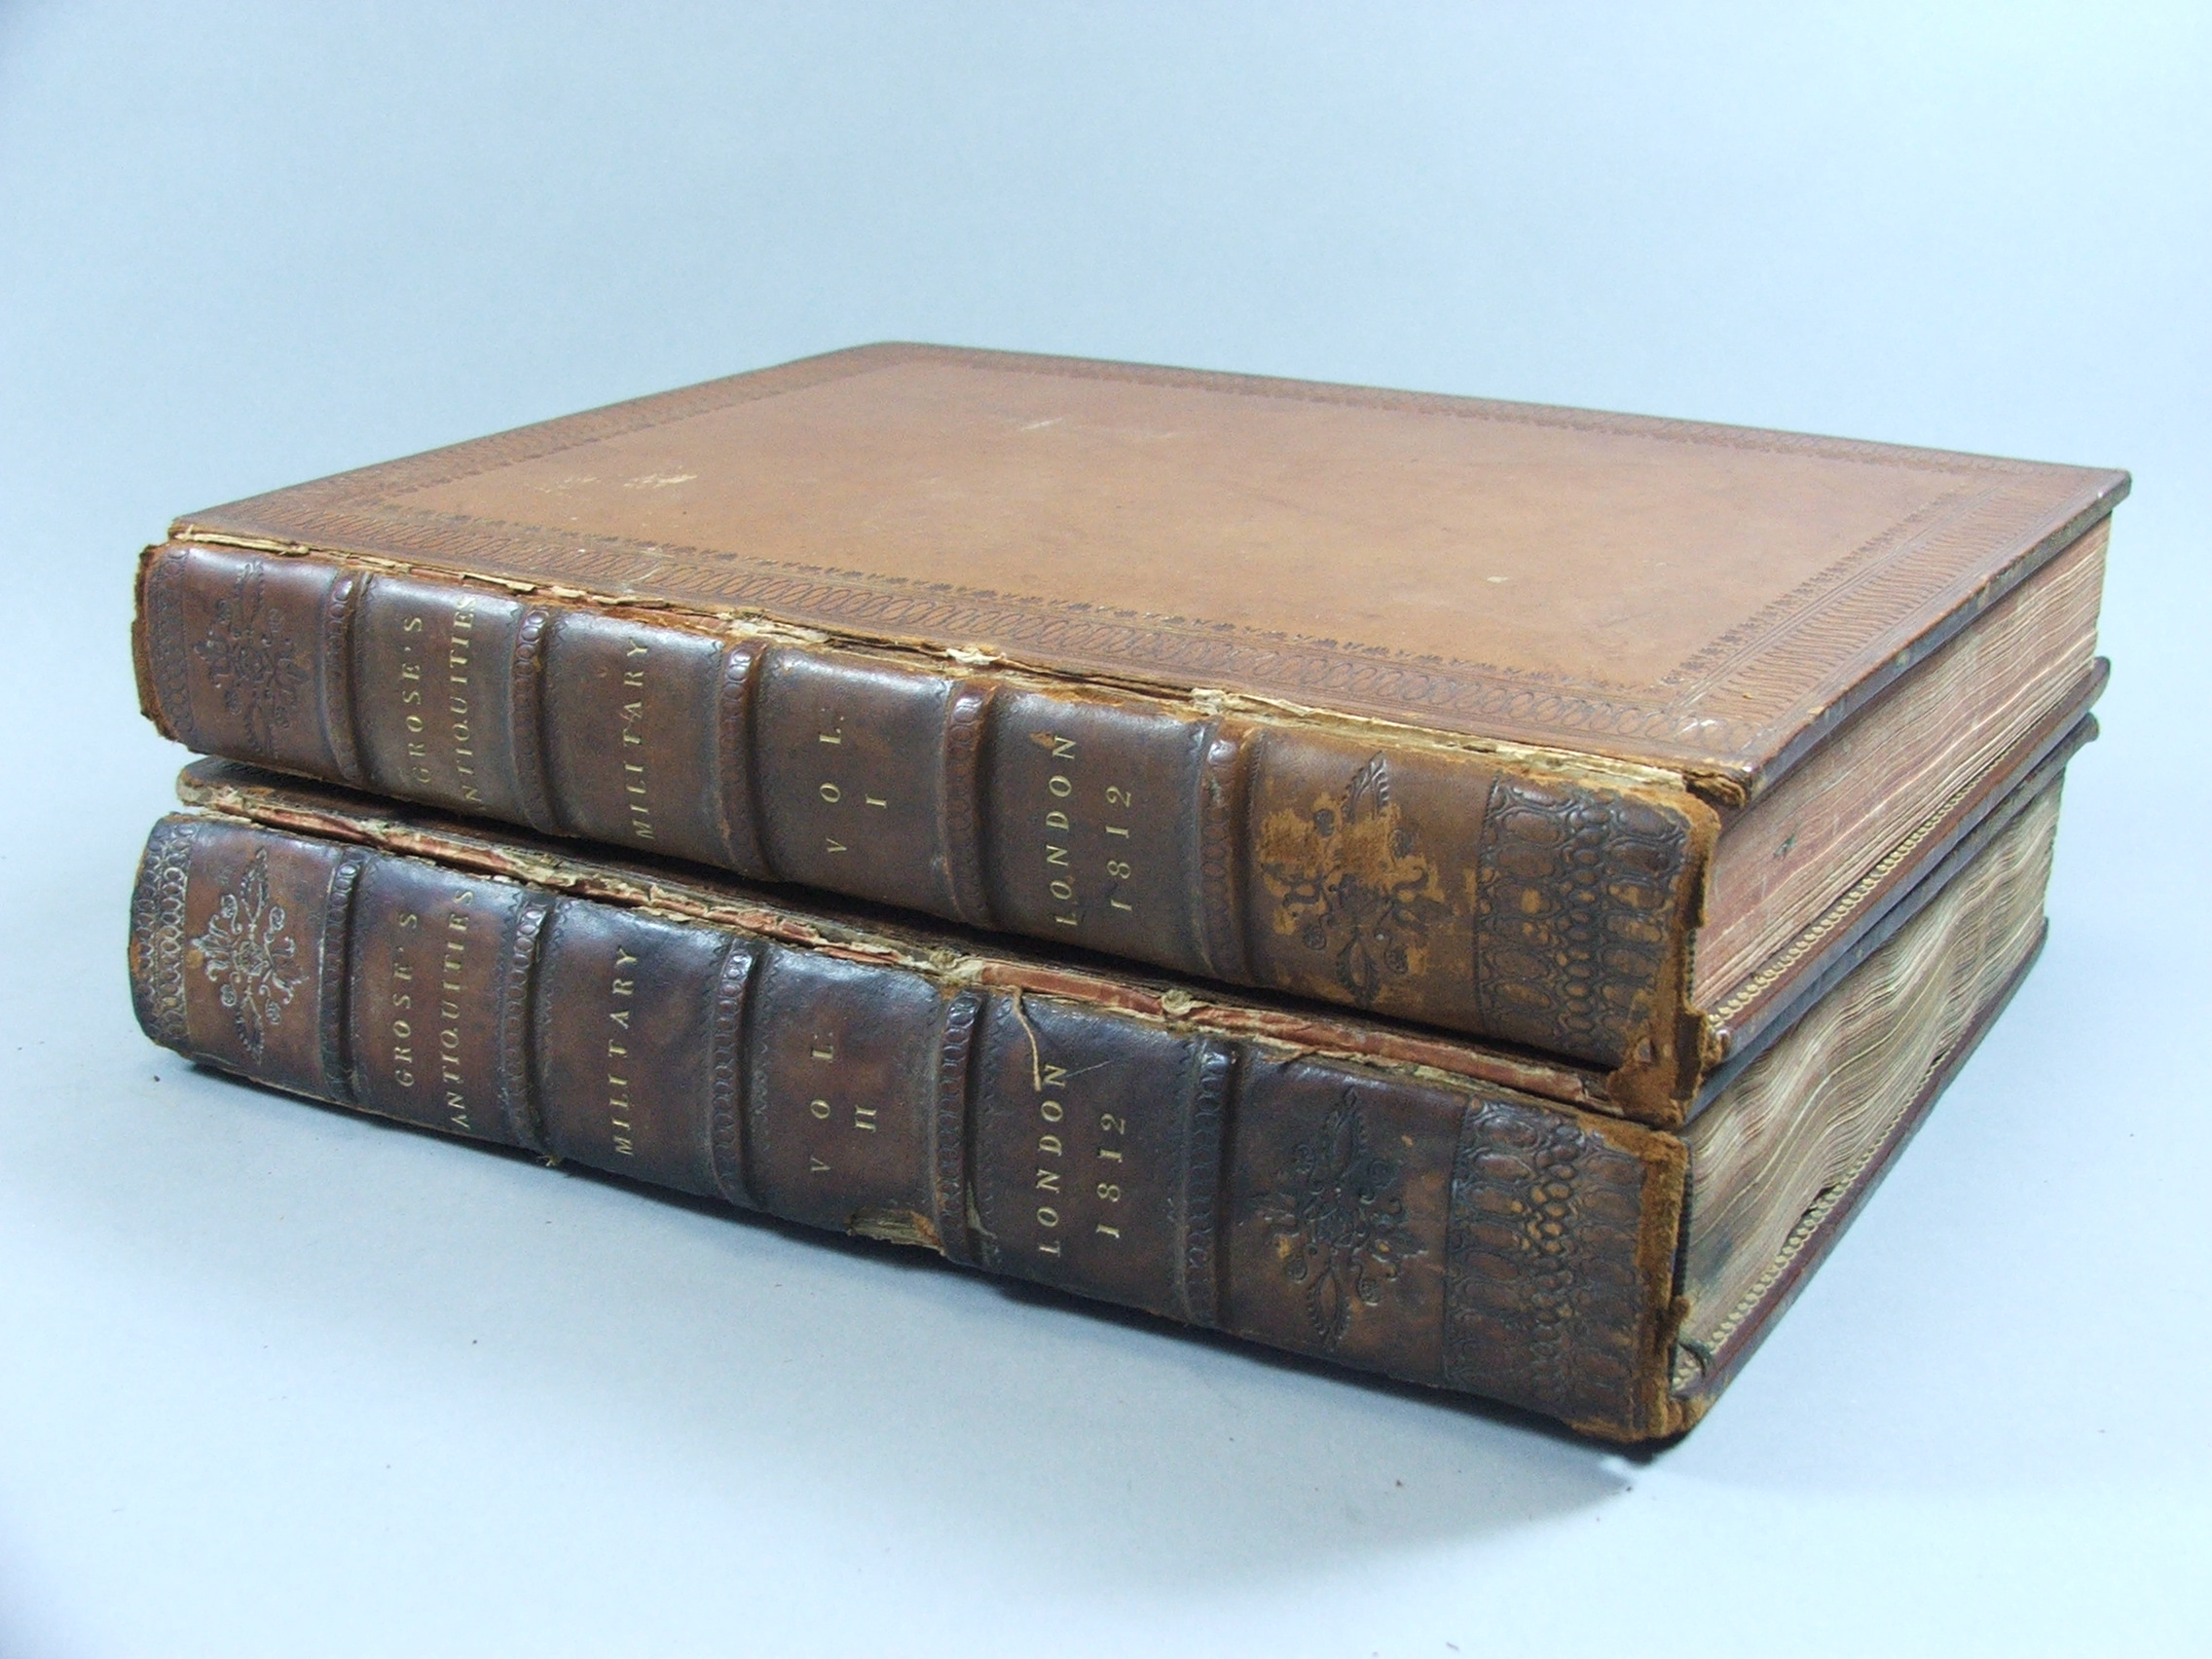 Two Bound Leather Volumes, Military Antiquities Respecting a History of the English Army.....by